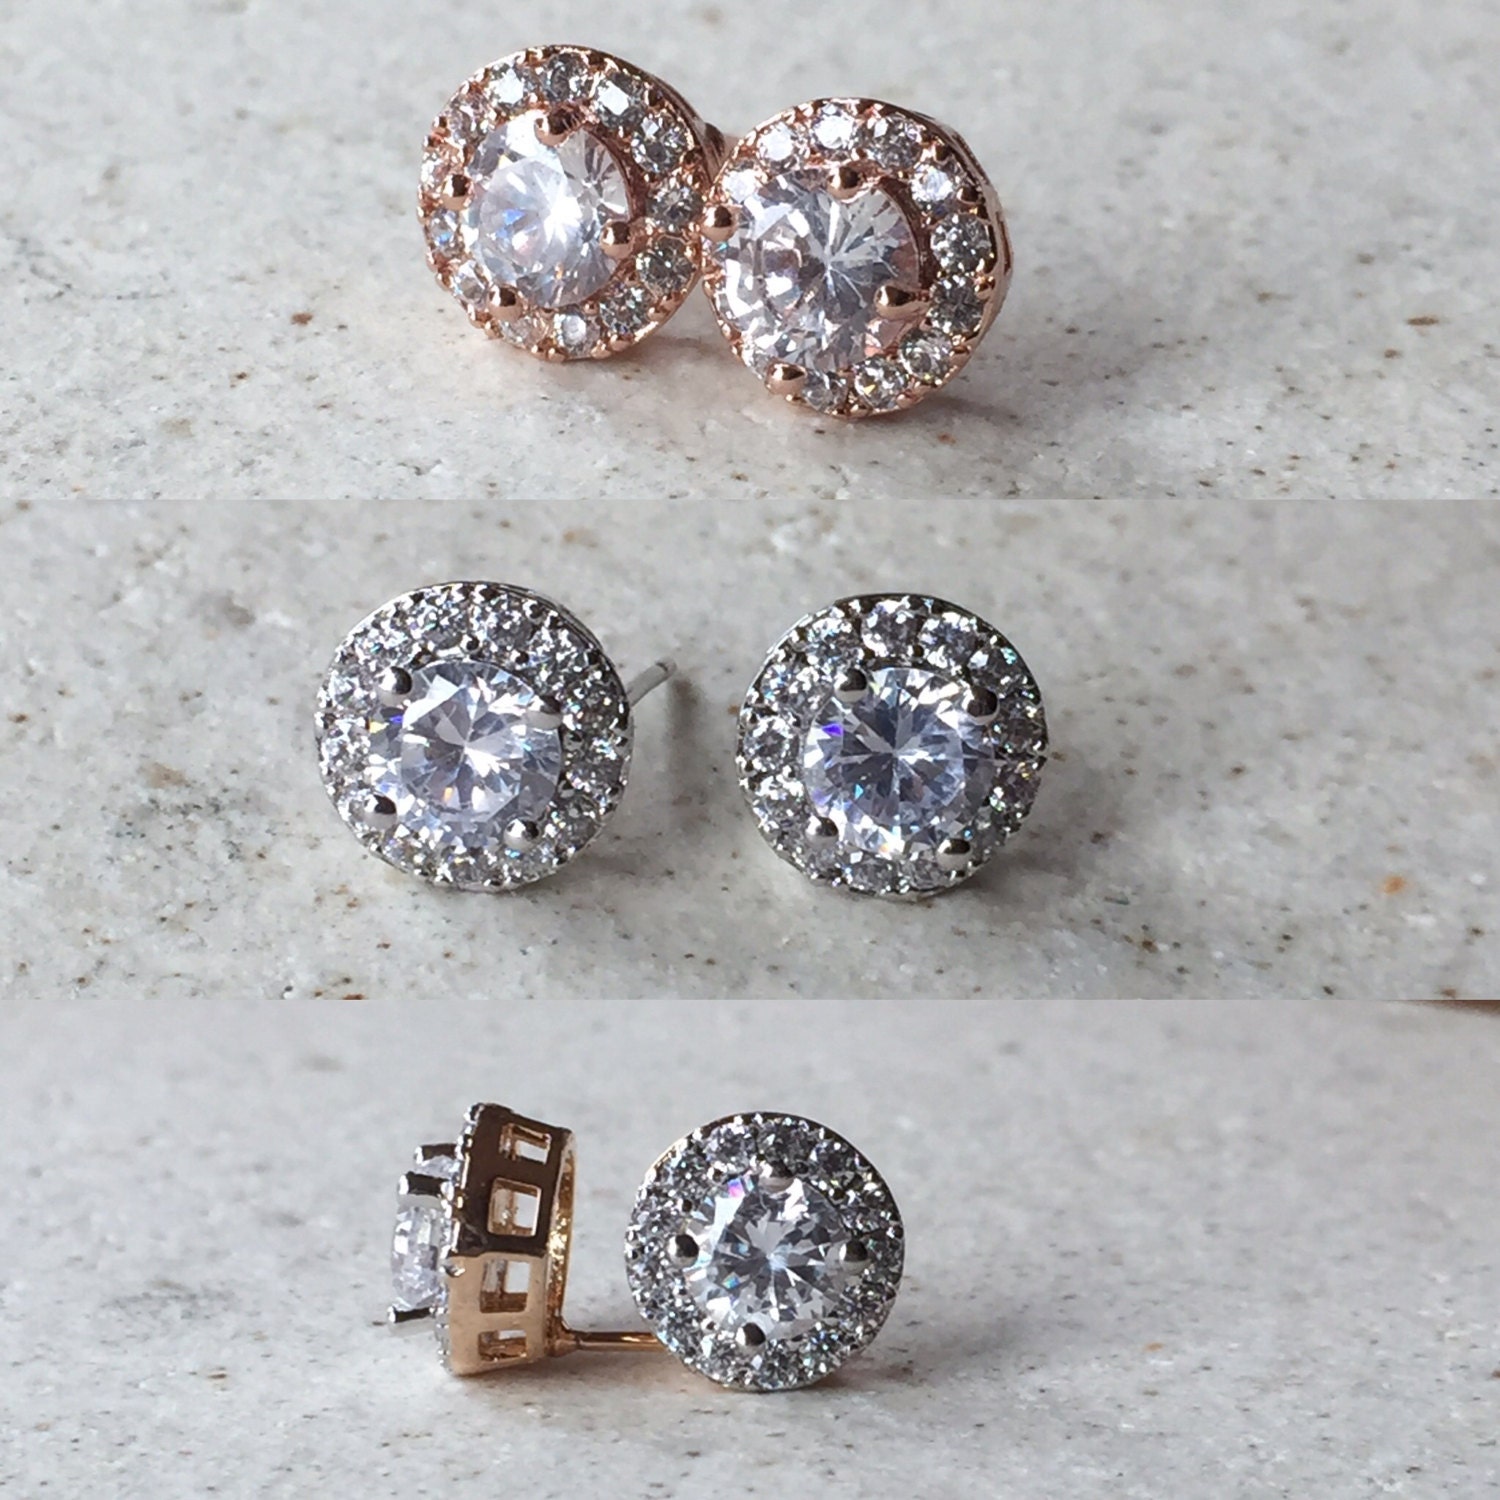 Rose gold crystal bridesmaid jewelry, rose gold filled CZ earrings are perfect for your bridesmaid gifts. rose gold stud earrings